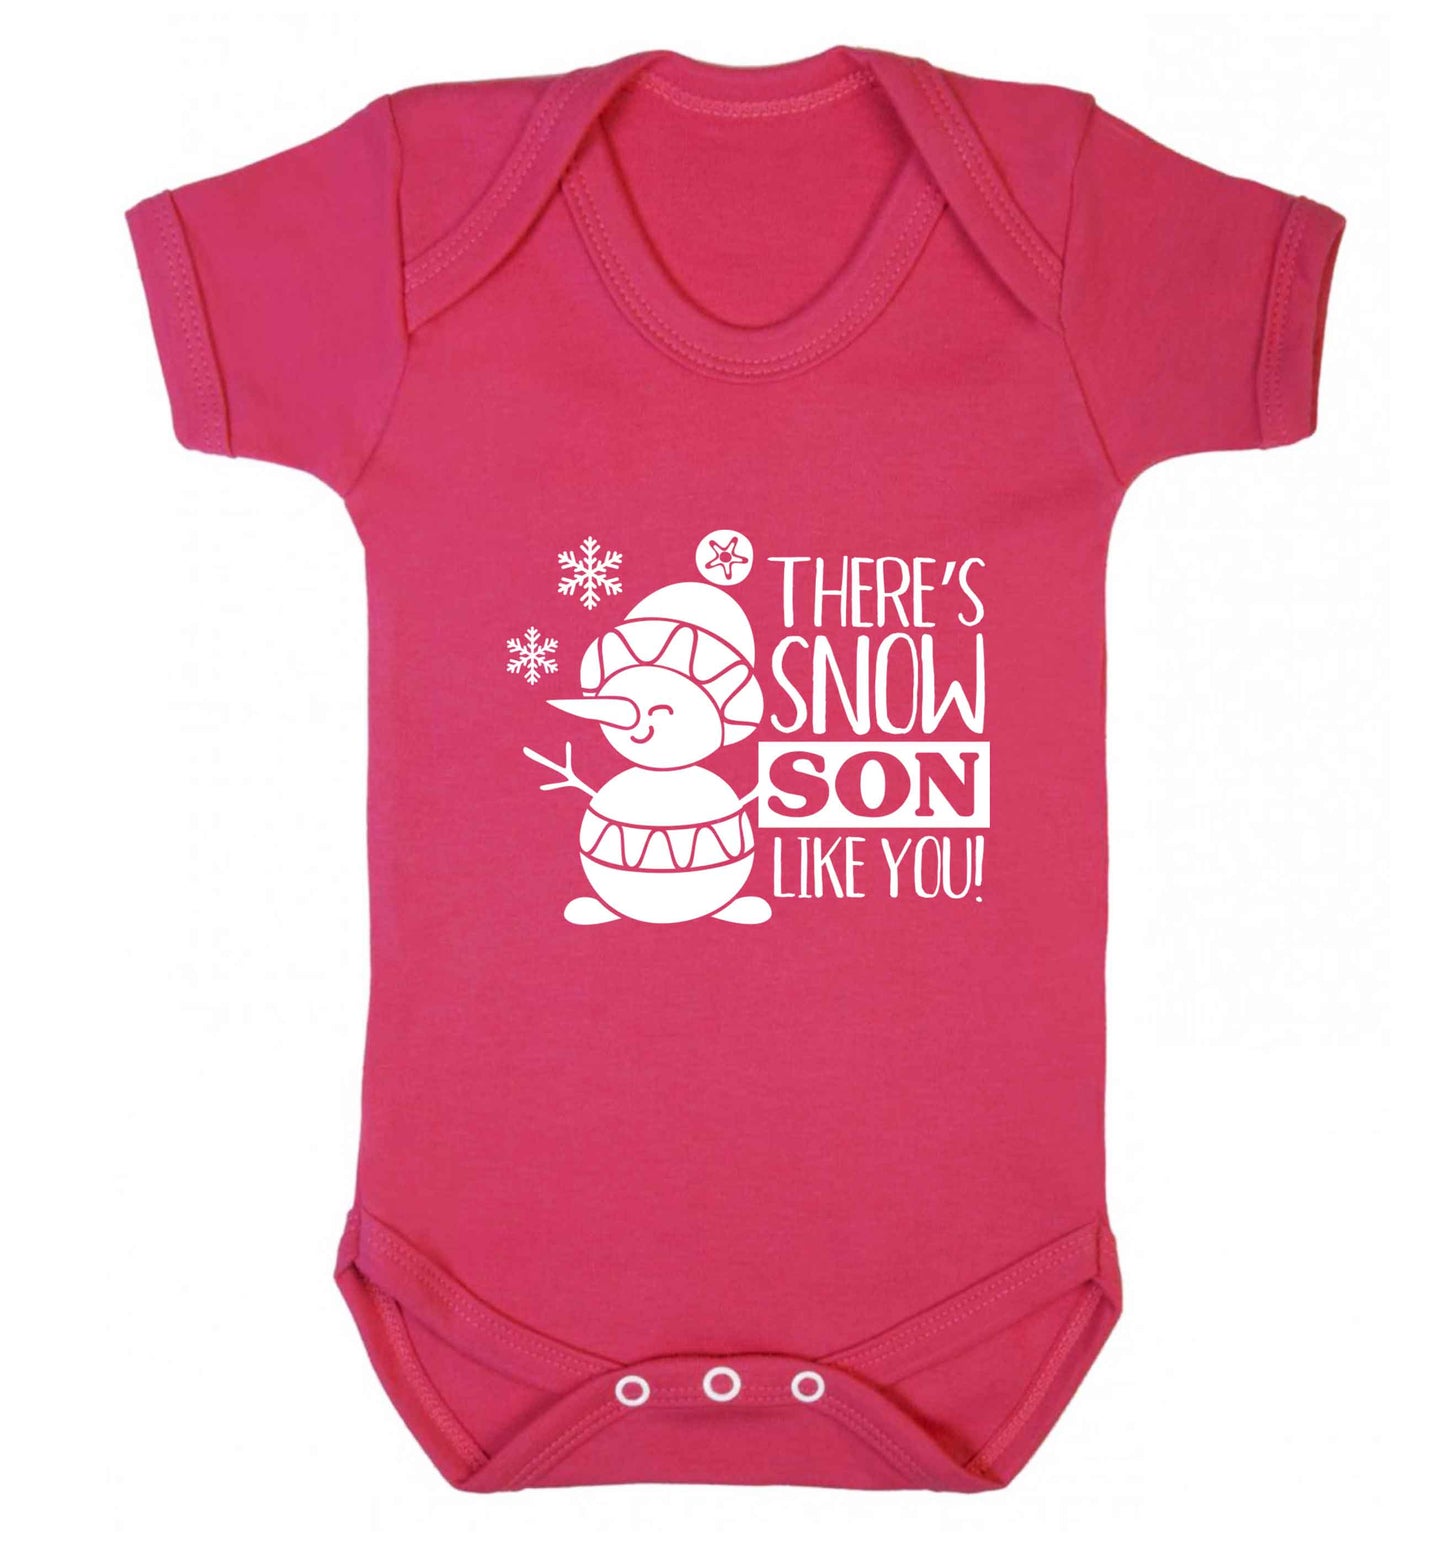 There's snow son like you baby vest dark pink 18-24 months